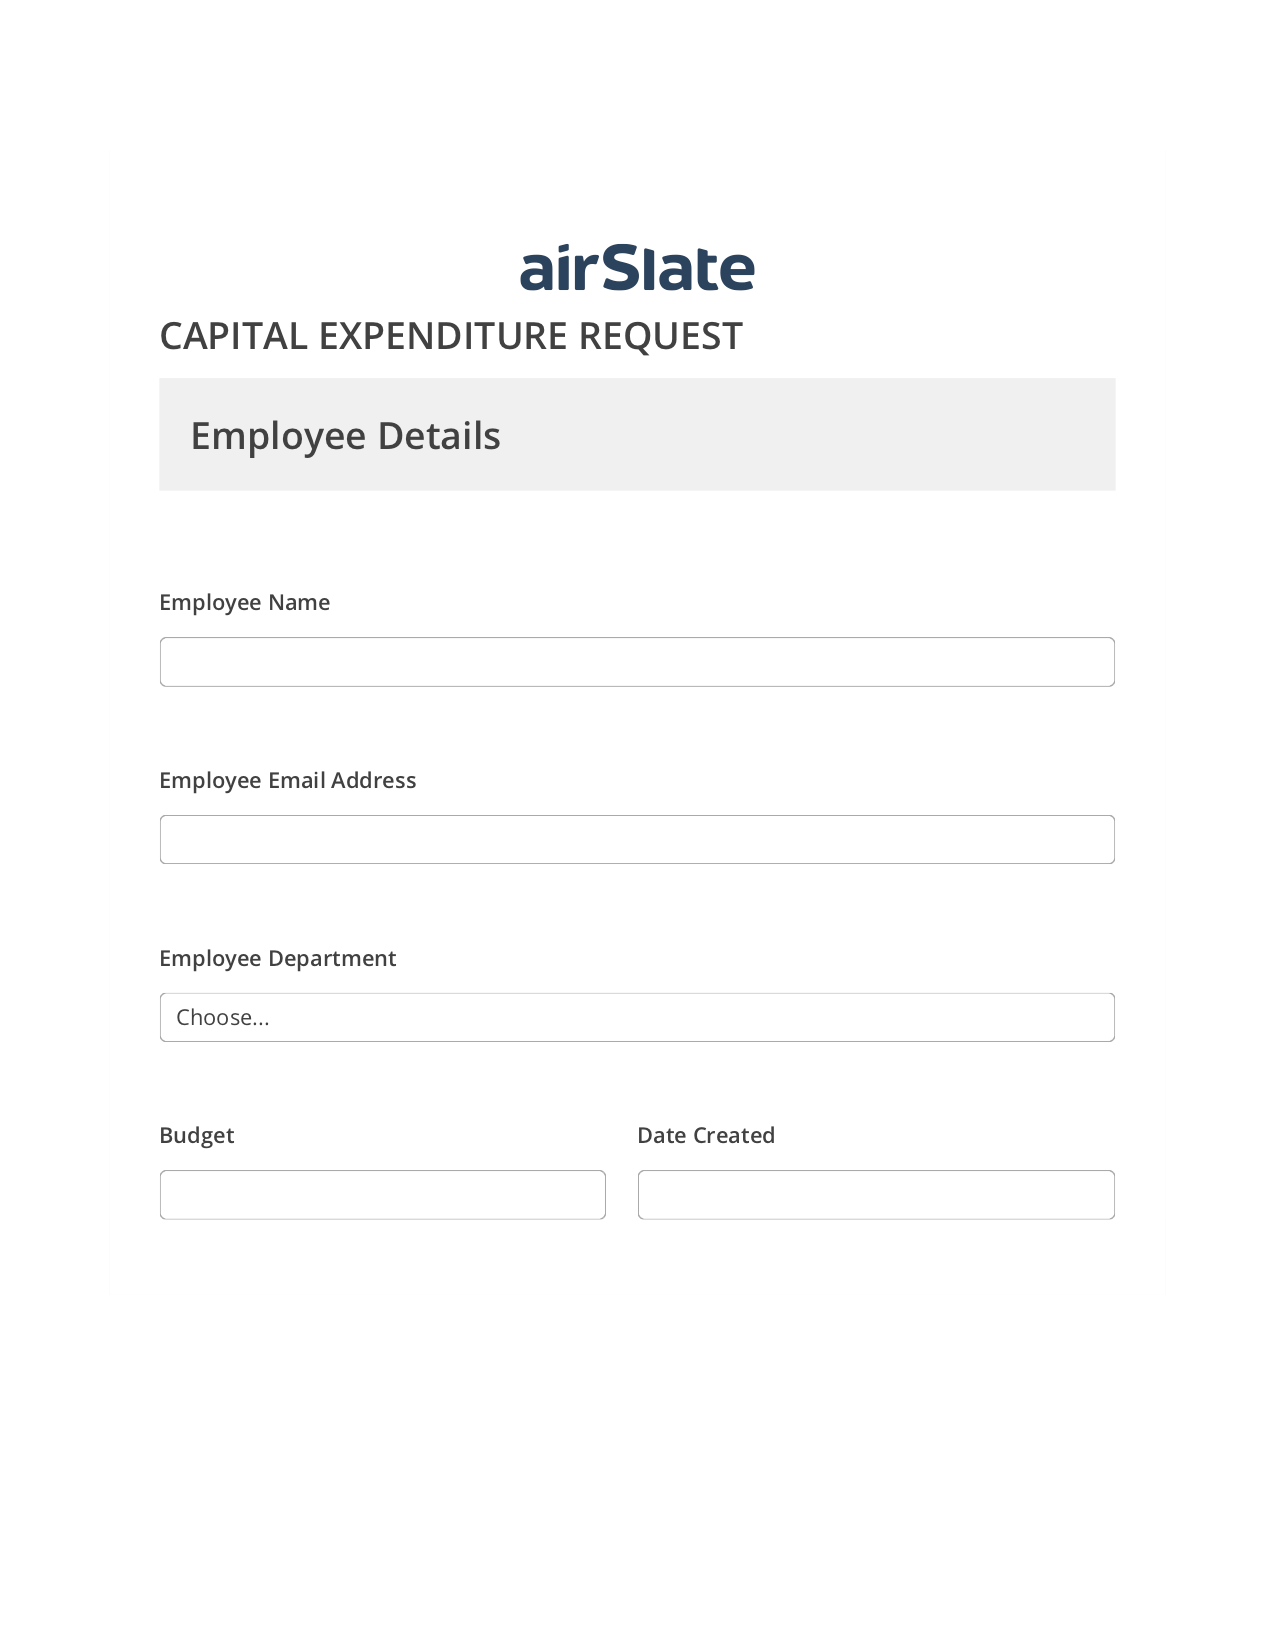 Capital Expenditure Request Approval Flow Pre-fill Slate from MS Dynamics 365 Records